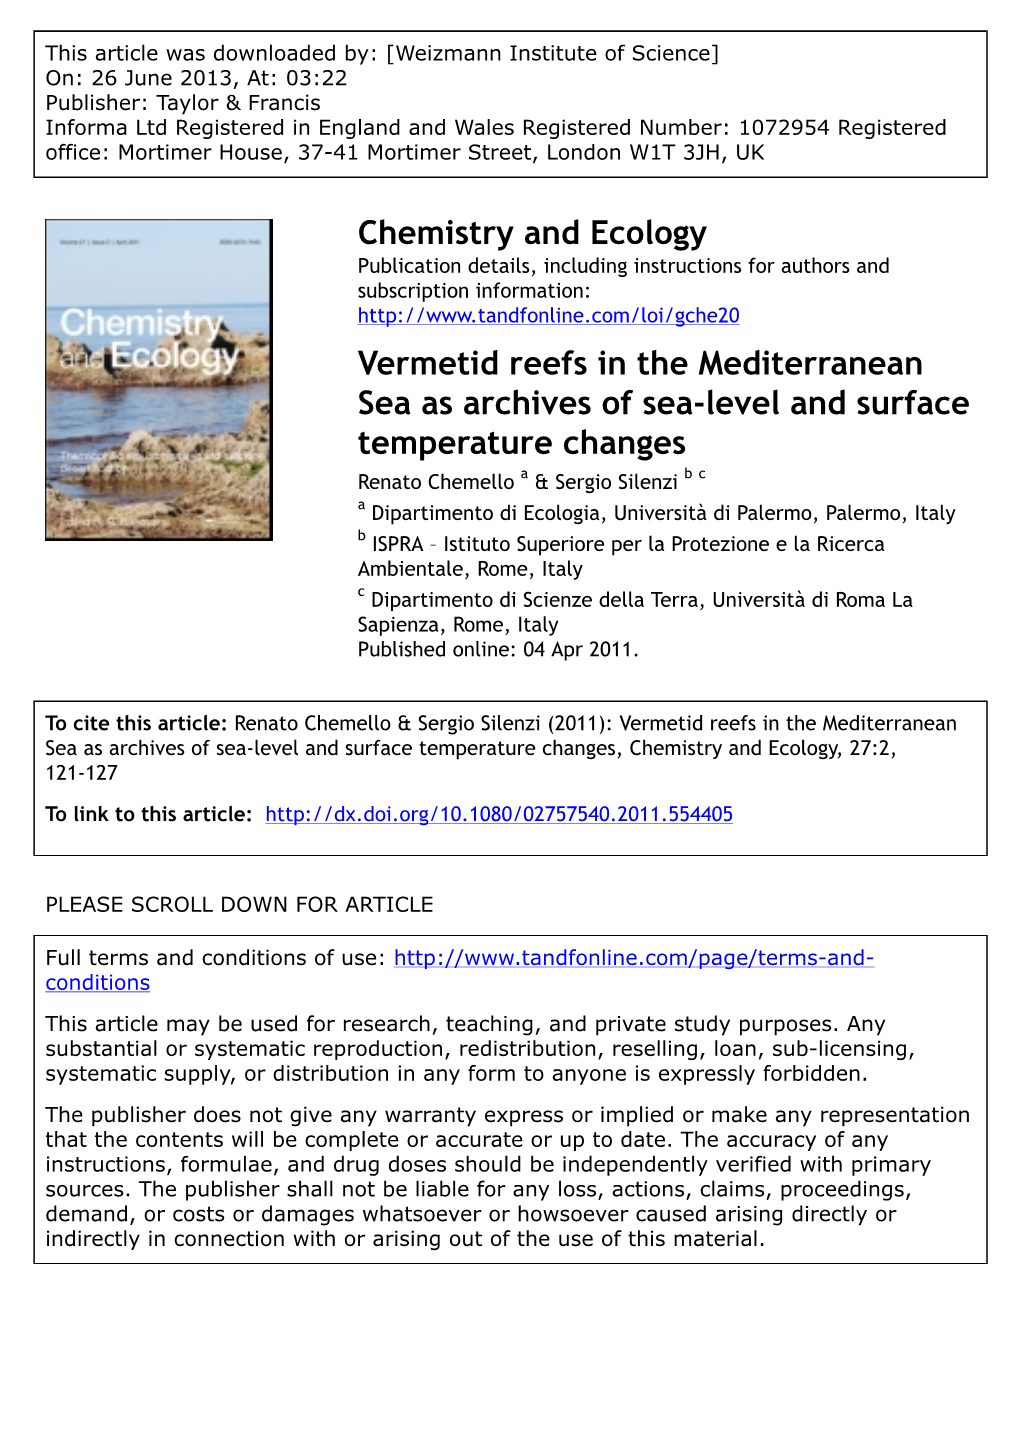 Vermetid Reefs in the Mediterranean Sea As Archives of Sea-Level And